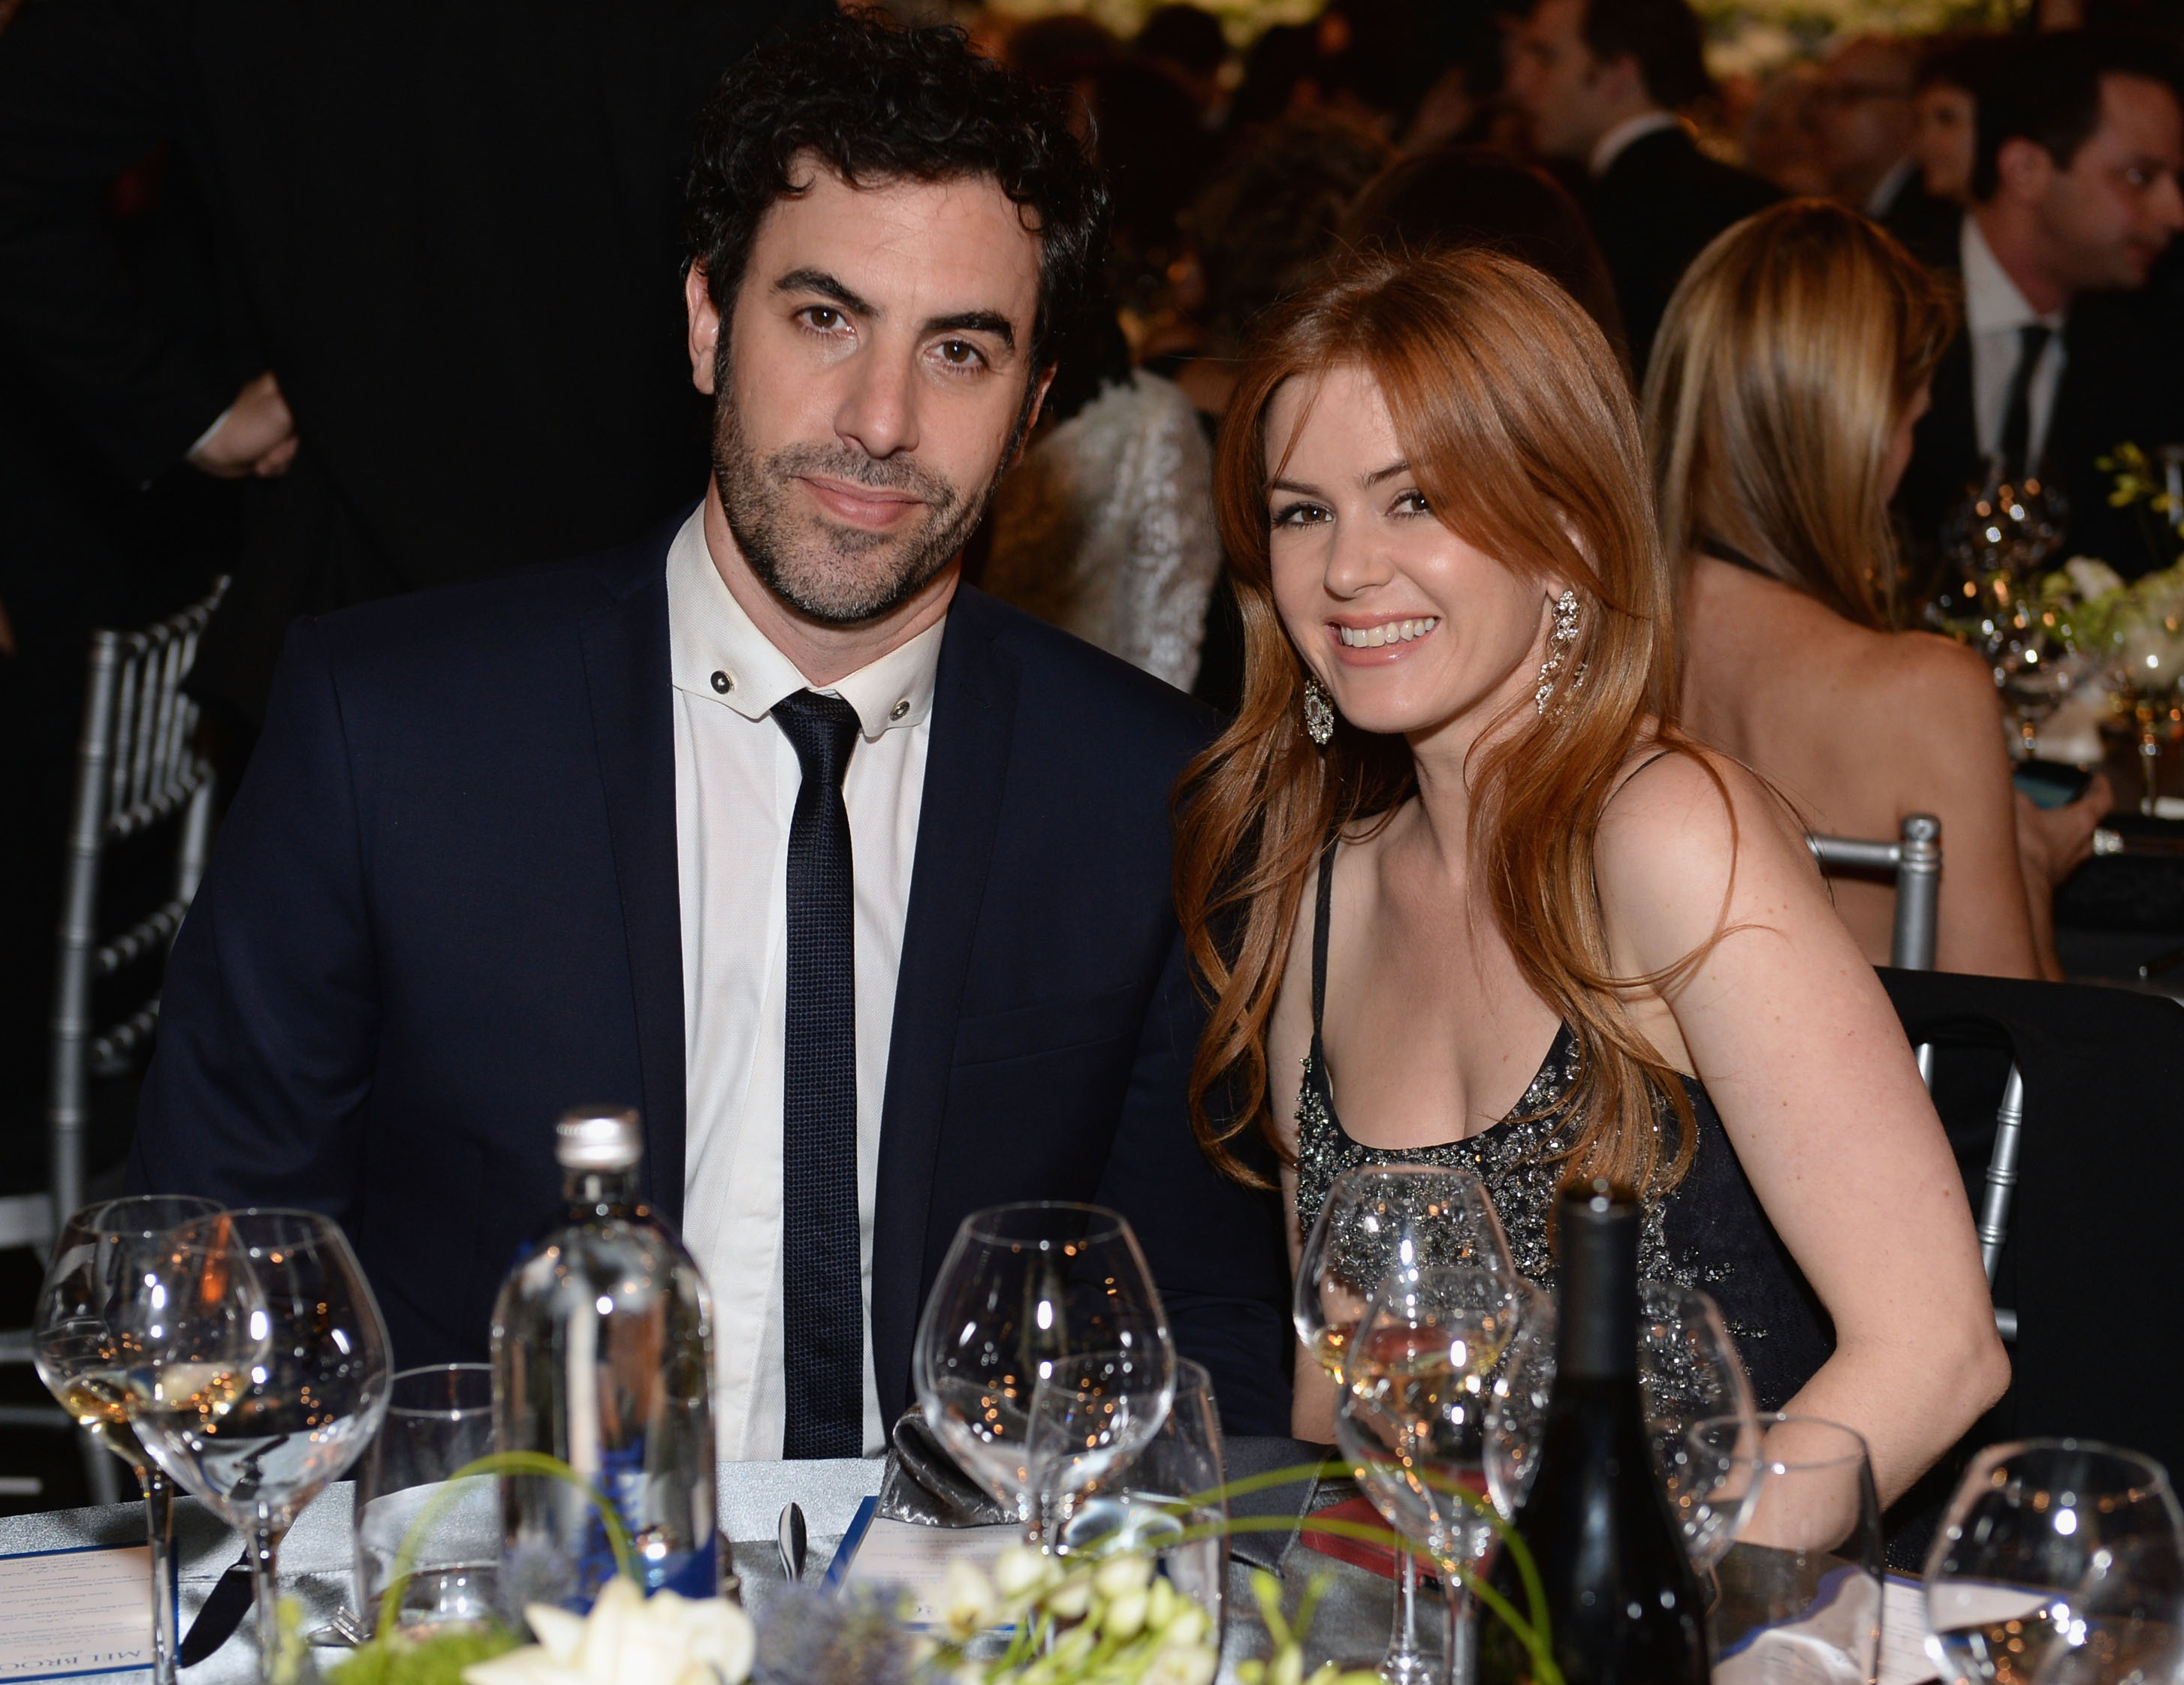 Actors Sacha Baron Cohen and Isla Fisher attend 41st AFI Life Achievement Award at Dolby Theatre on June 6, 2013 in Hollywood. (Michael Kovac—WireImage/Getty Images)